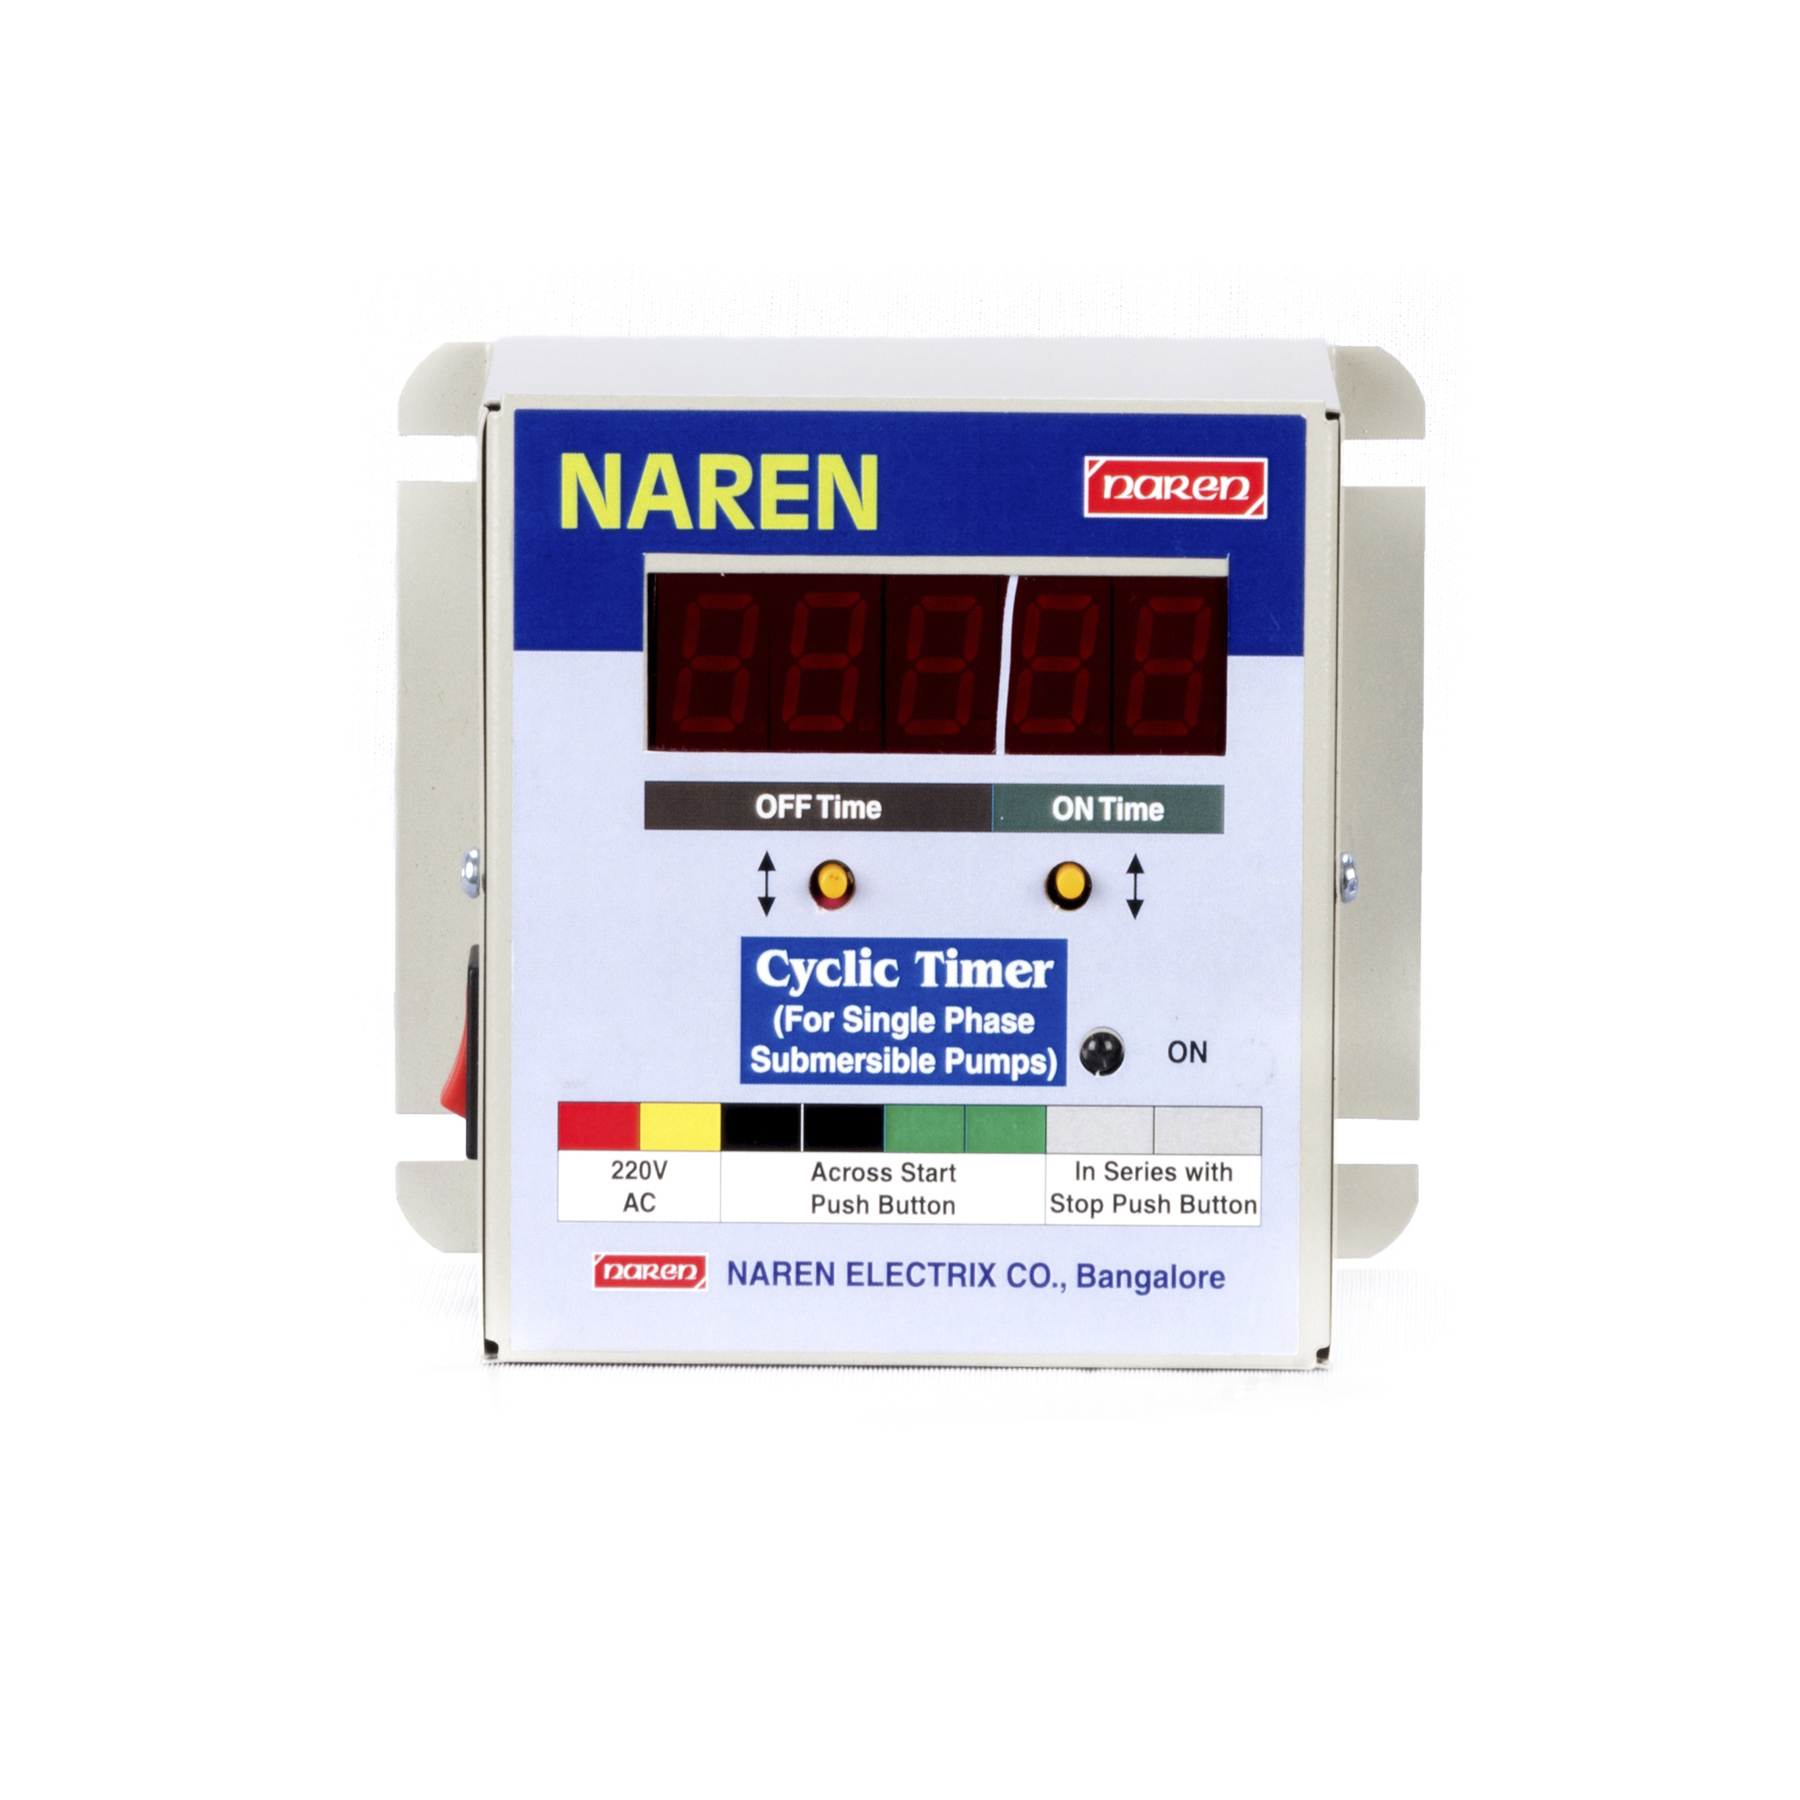 Naren - Cyclic Timer for Single Phase Pumps